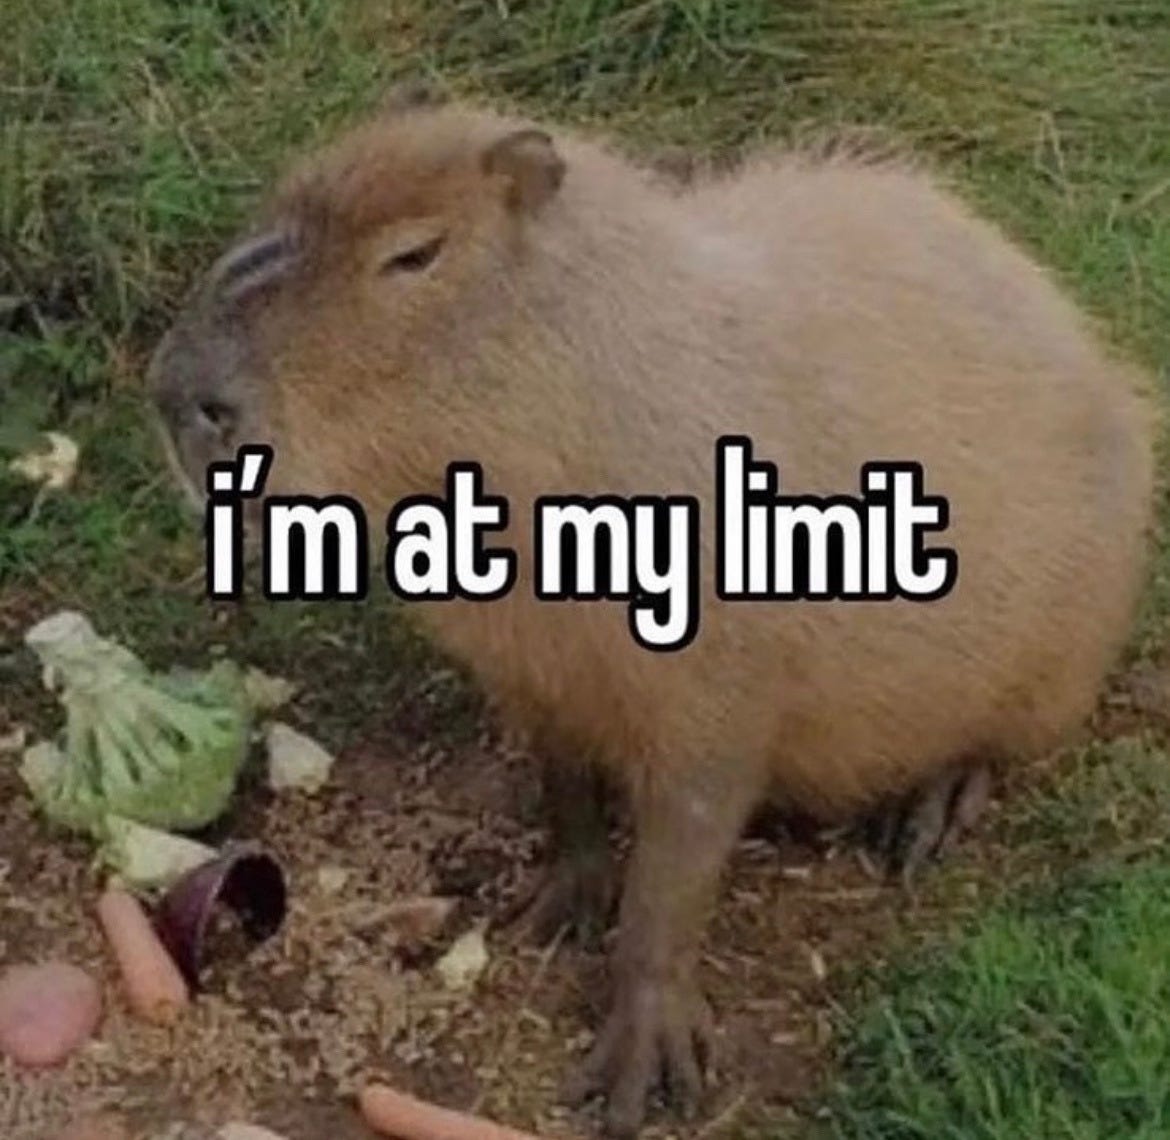 A picture of a capybara with "I am at my limit" overlayed on top.